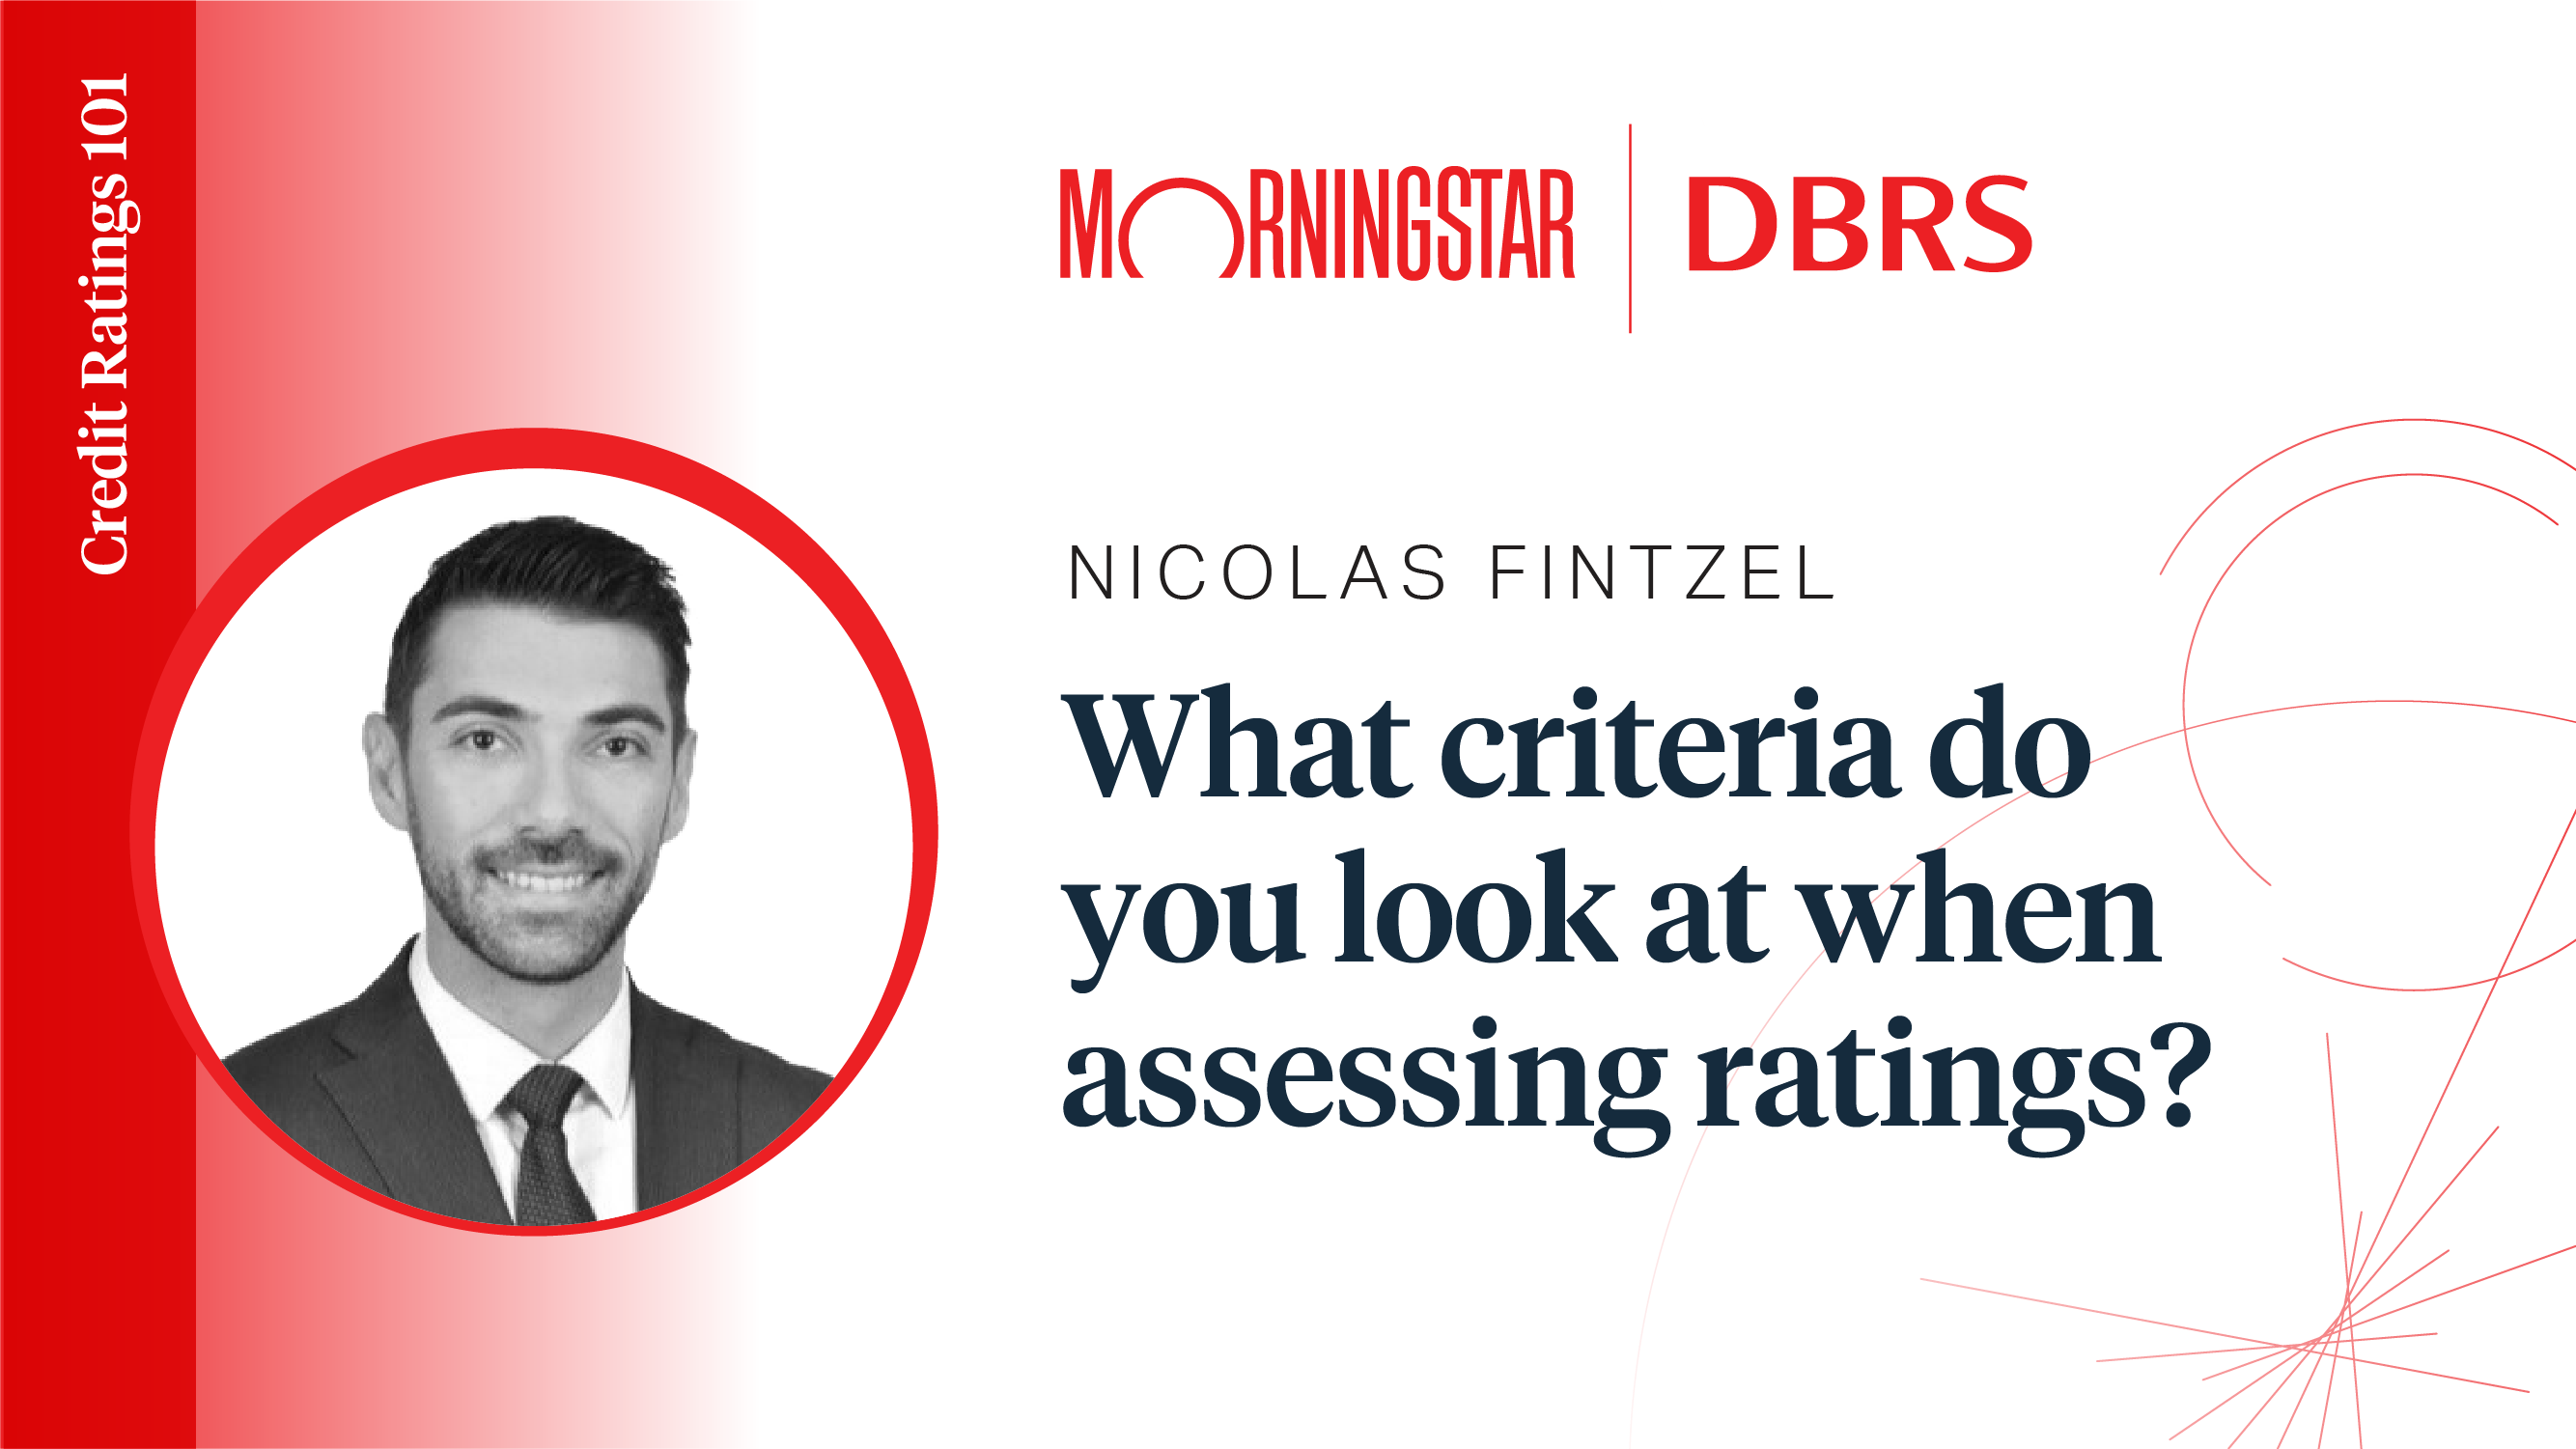 Credit Ratings 101: Nicolas Fintzel - What Criteria do you Look at when Assessing a Rating?